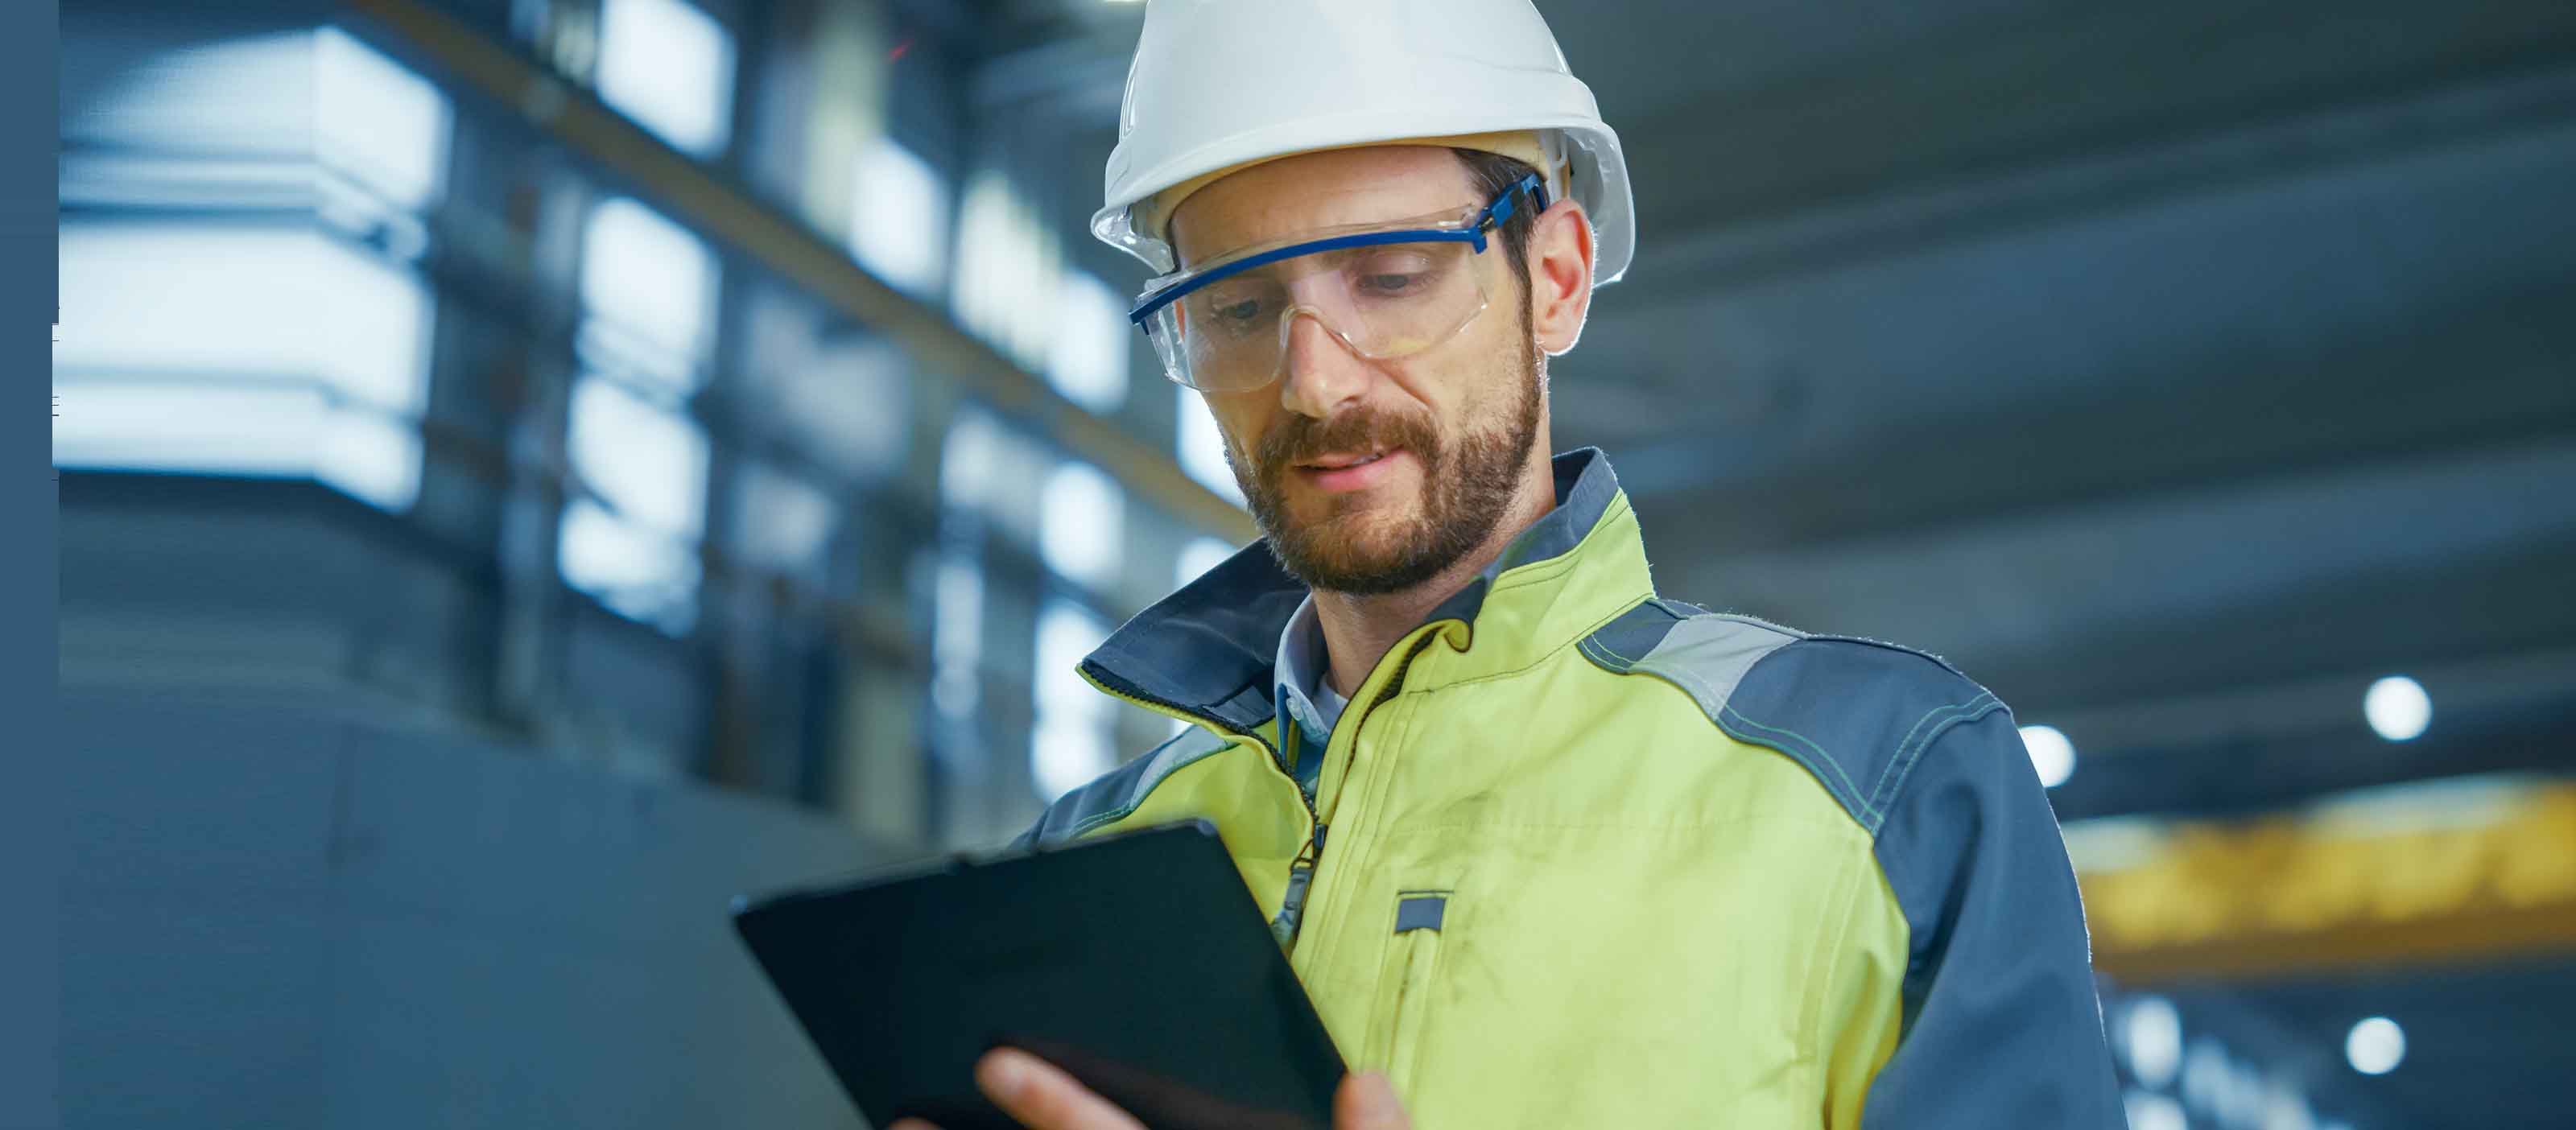 Industrial engineer using iFIX productivity tools for HMI/SCADA visibility